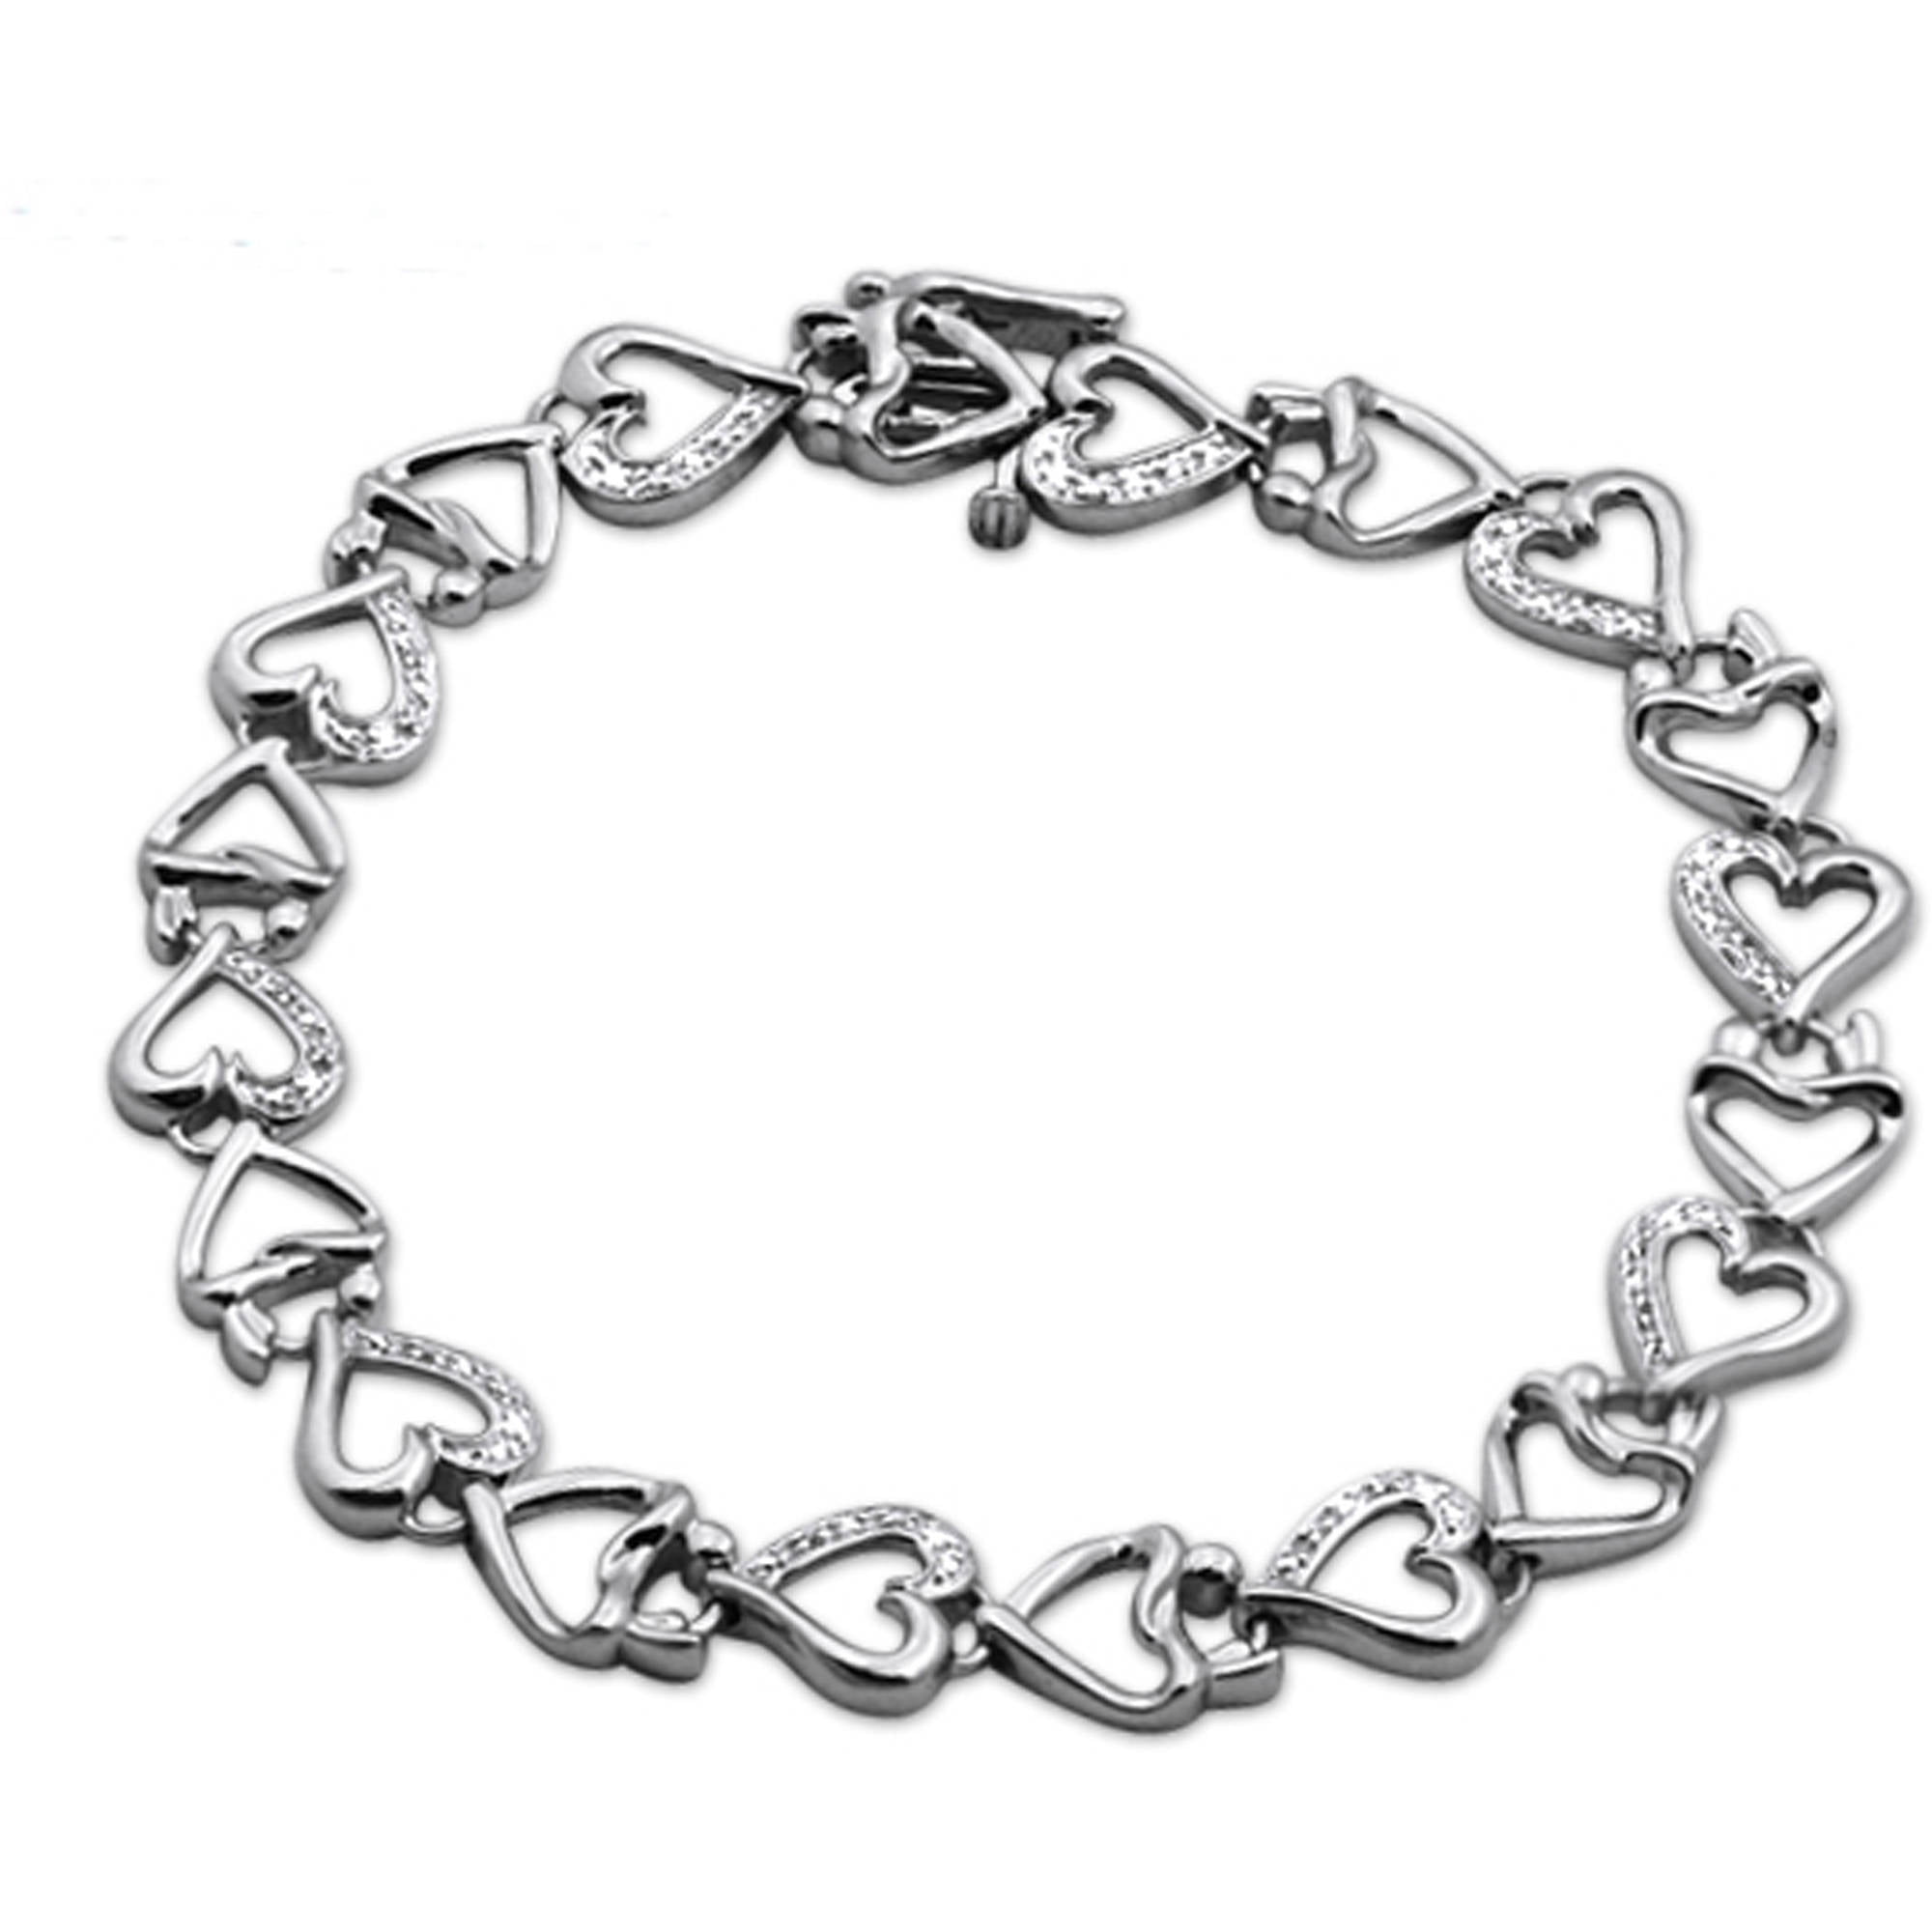 Oval Link Bracelet with Sterling Silver Heart Charms & Toggle